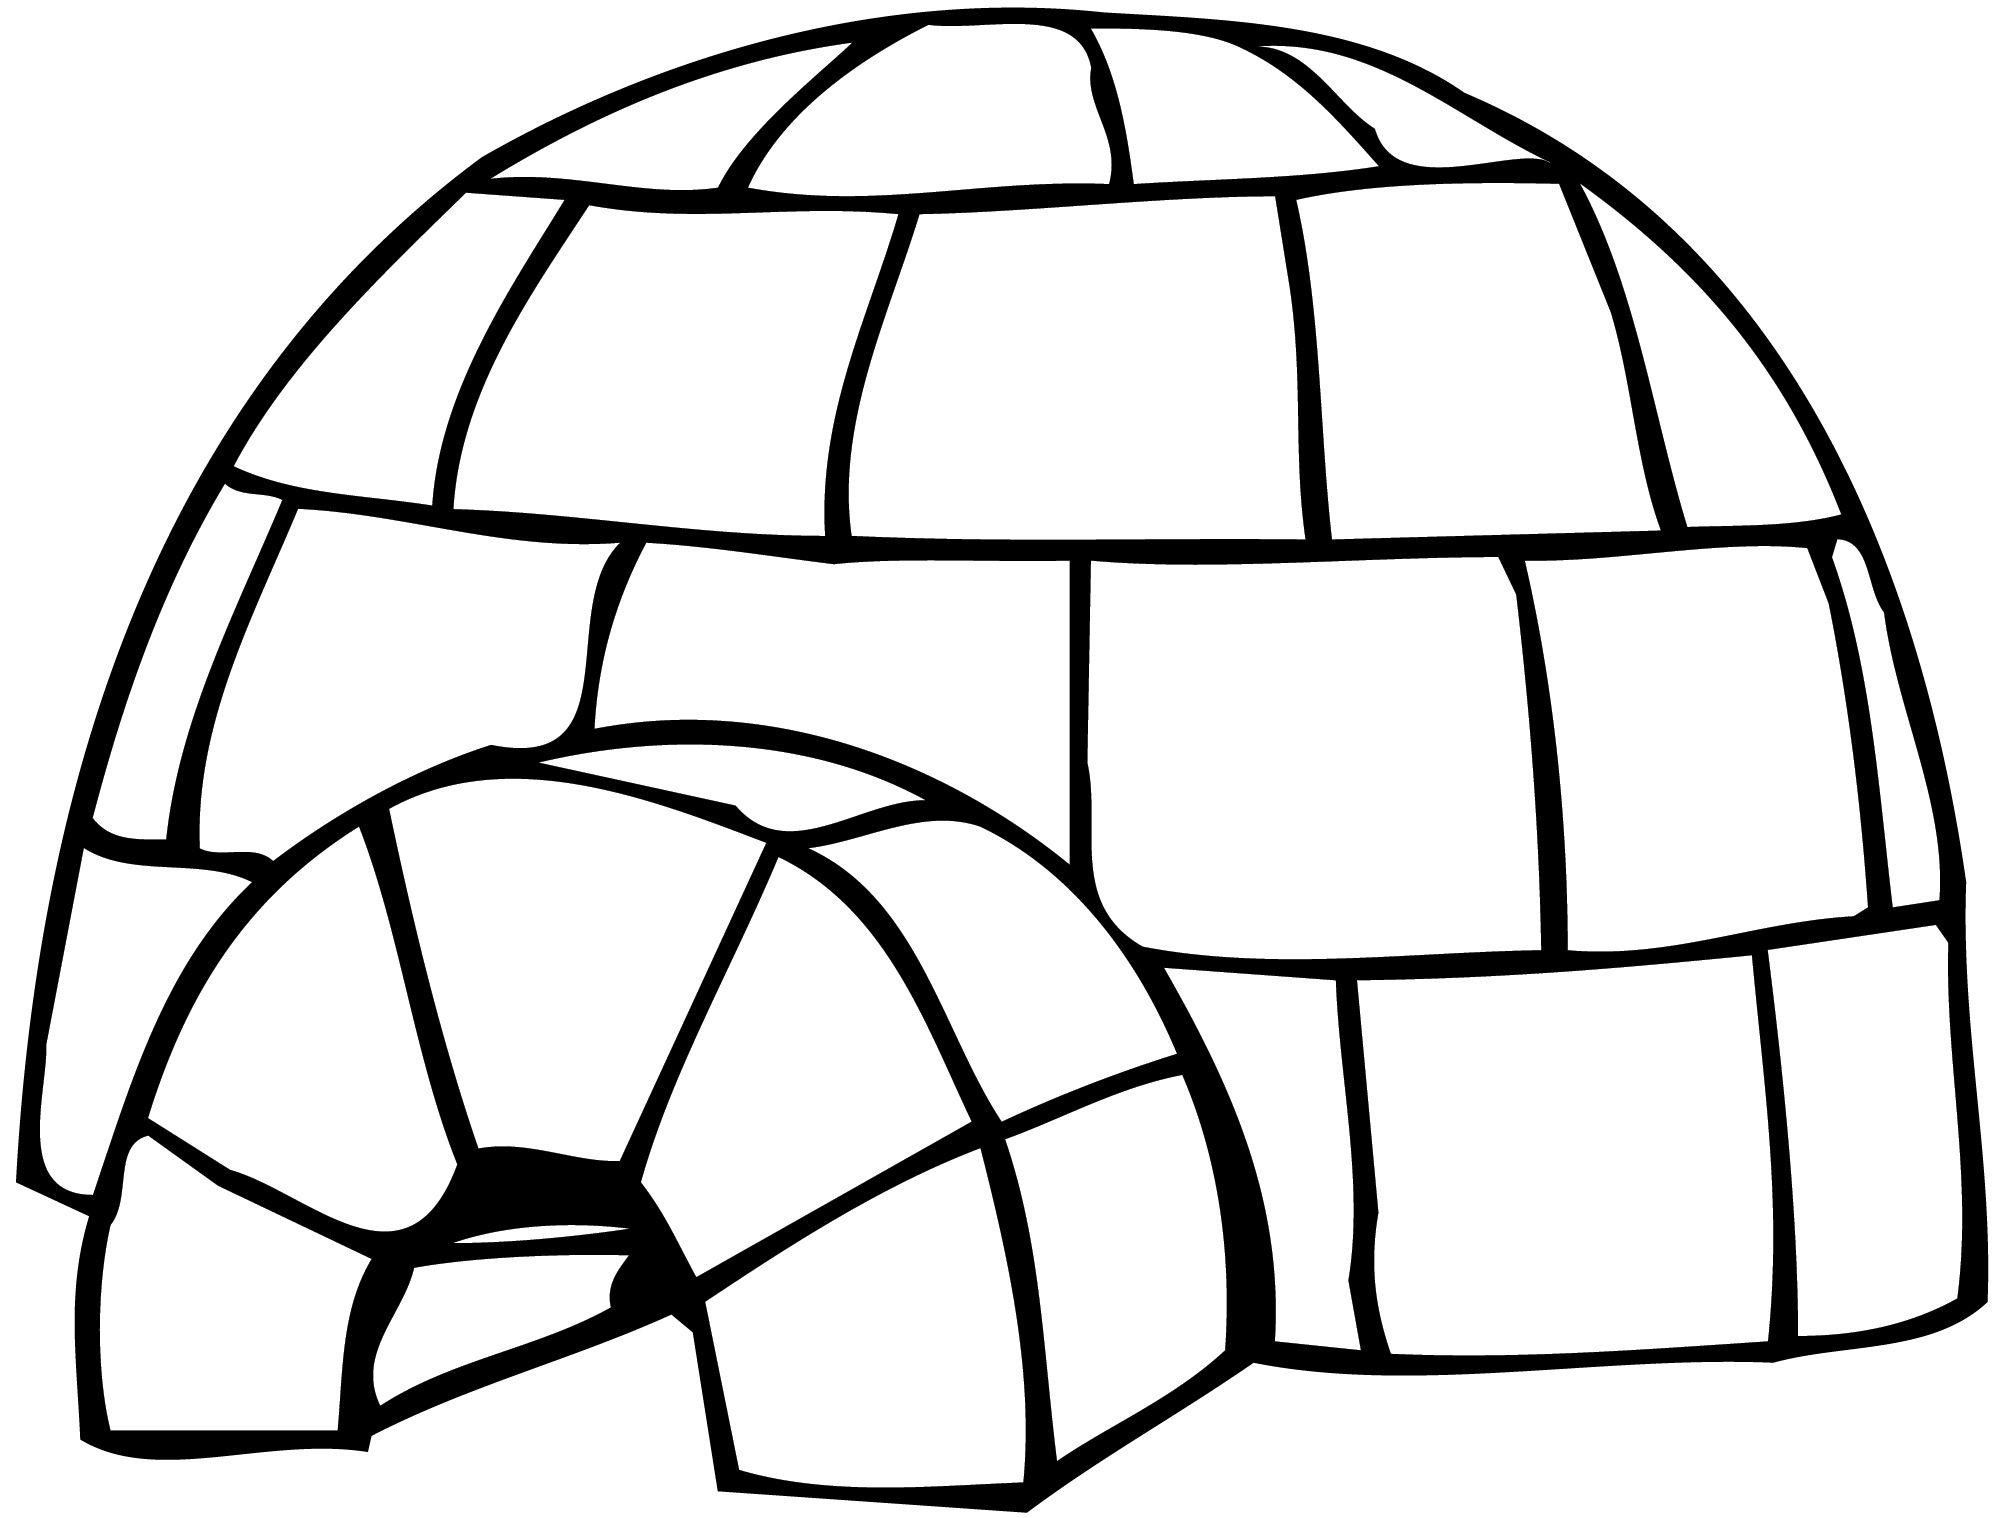 igloo clipart colouring page